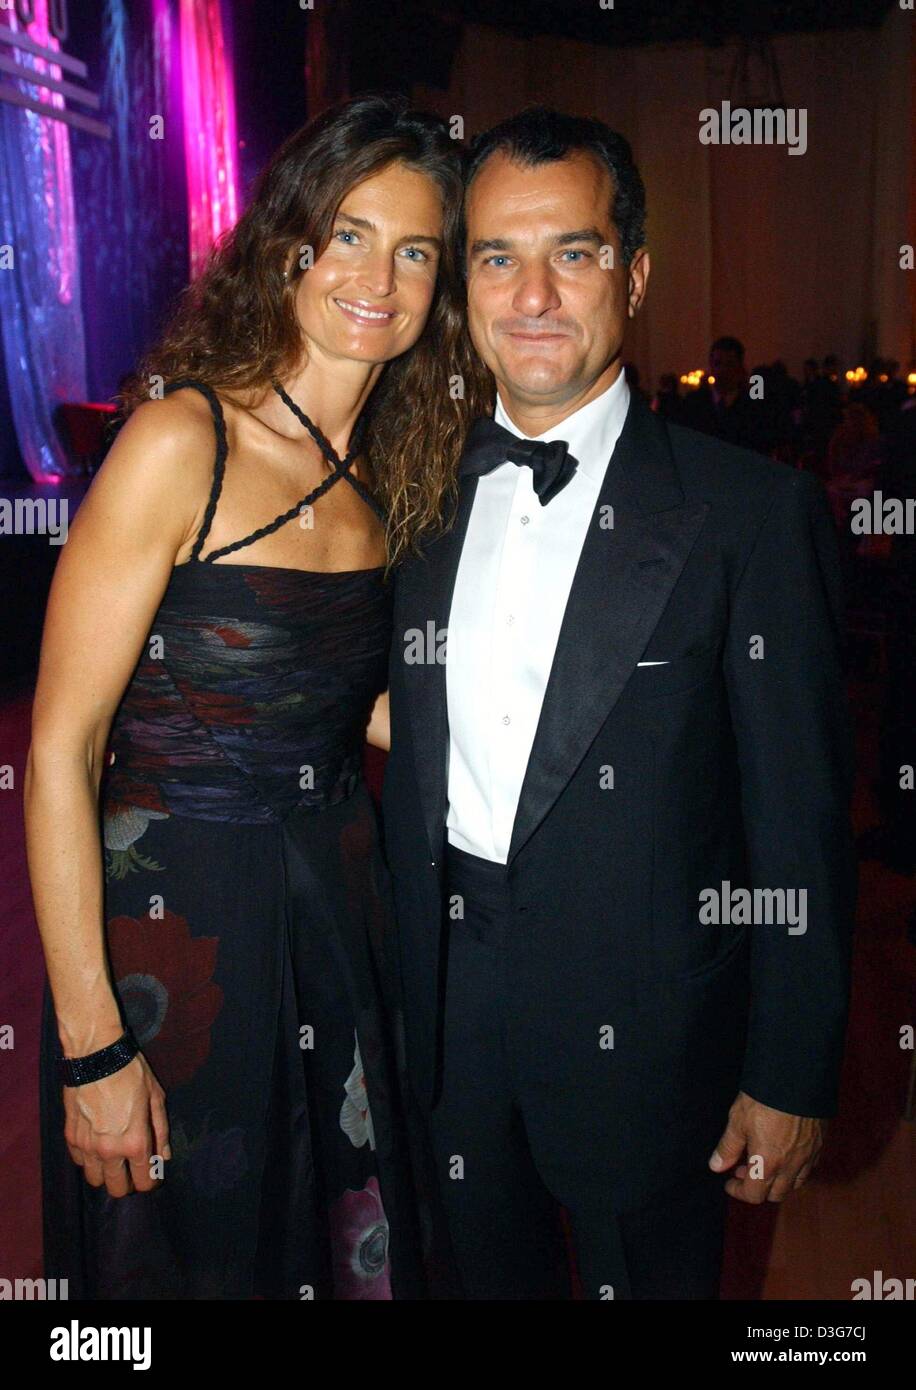 dpa) - Leonardo Ferragamo, a family member of the Italian fashion group,  and his wife Beatrice arrive to the UNESCO Children's Fund benefit gala  held at a hotel in Neuss, Germany, 8